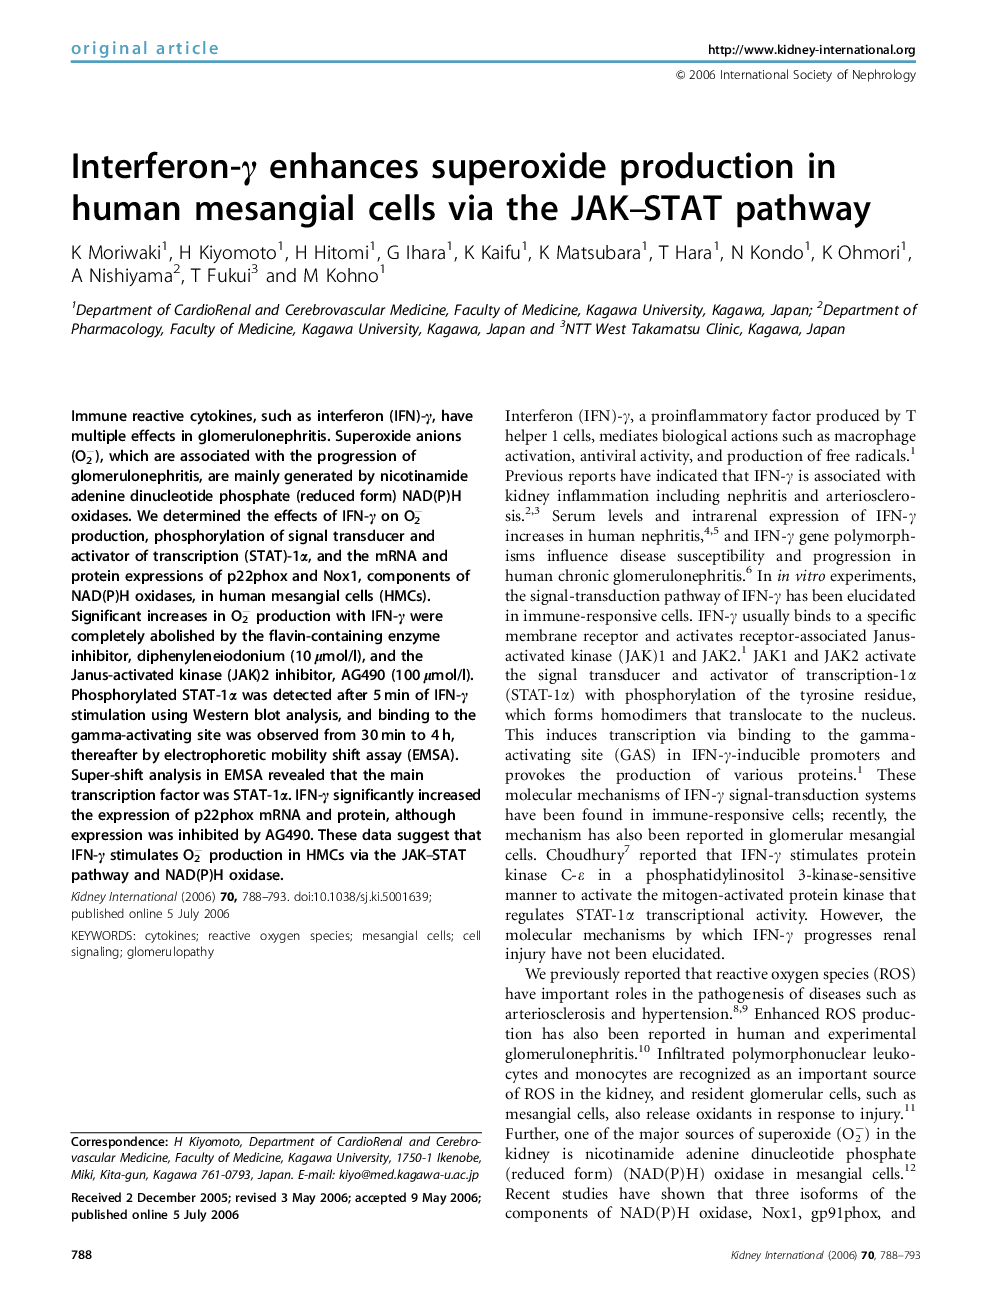 Interferon-γ enhances superoxide production in human mesangial cells via the JAK–STAT pathway